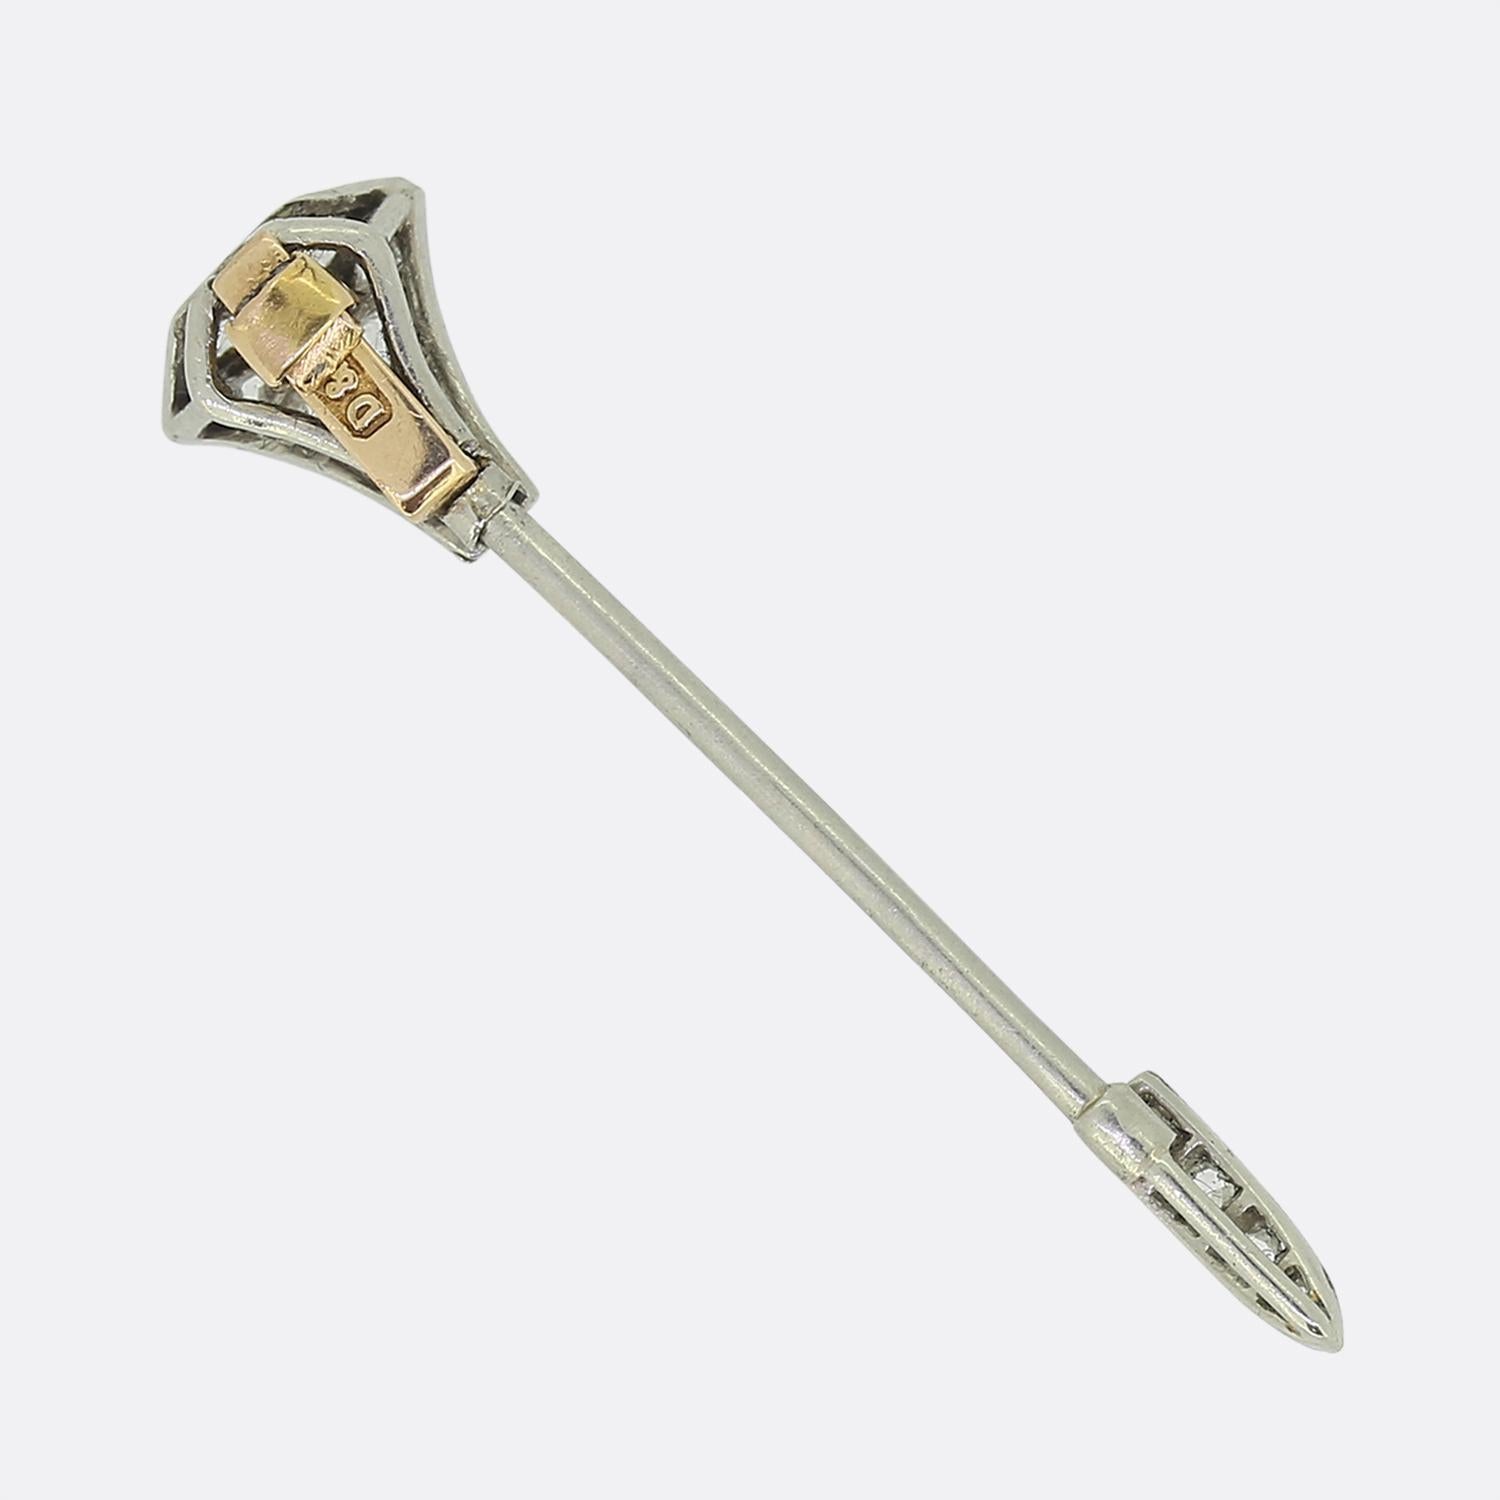 Here we have a classic jabot pin crafted during the early stages of the 20th century. This platinum piece takes on the form of an arrow with rose cut diamonds set at the flights and tip; all of which are contained within a fine milgrain detailing.